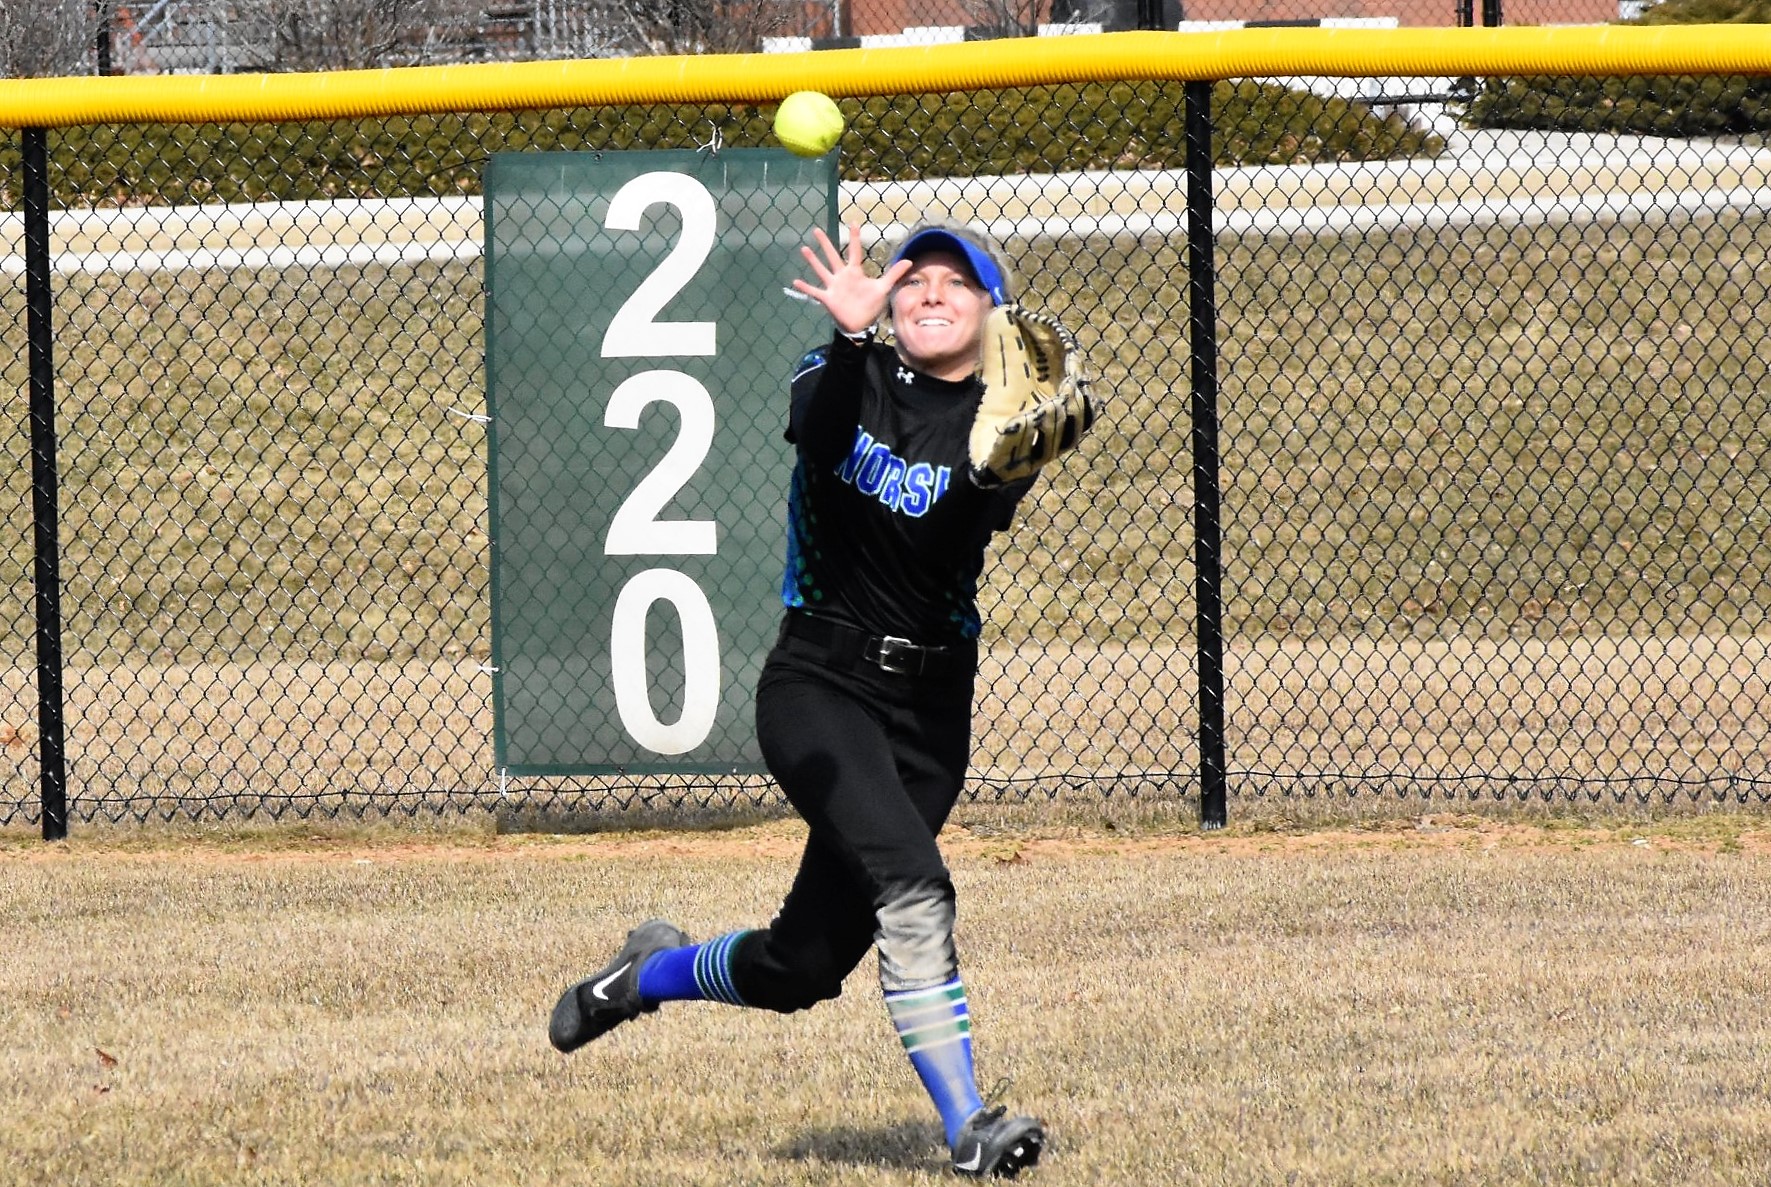 Emily Bruntjens reaching out to make a catch on the run near the 220 sign on the outfield fence